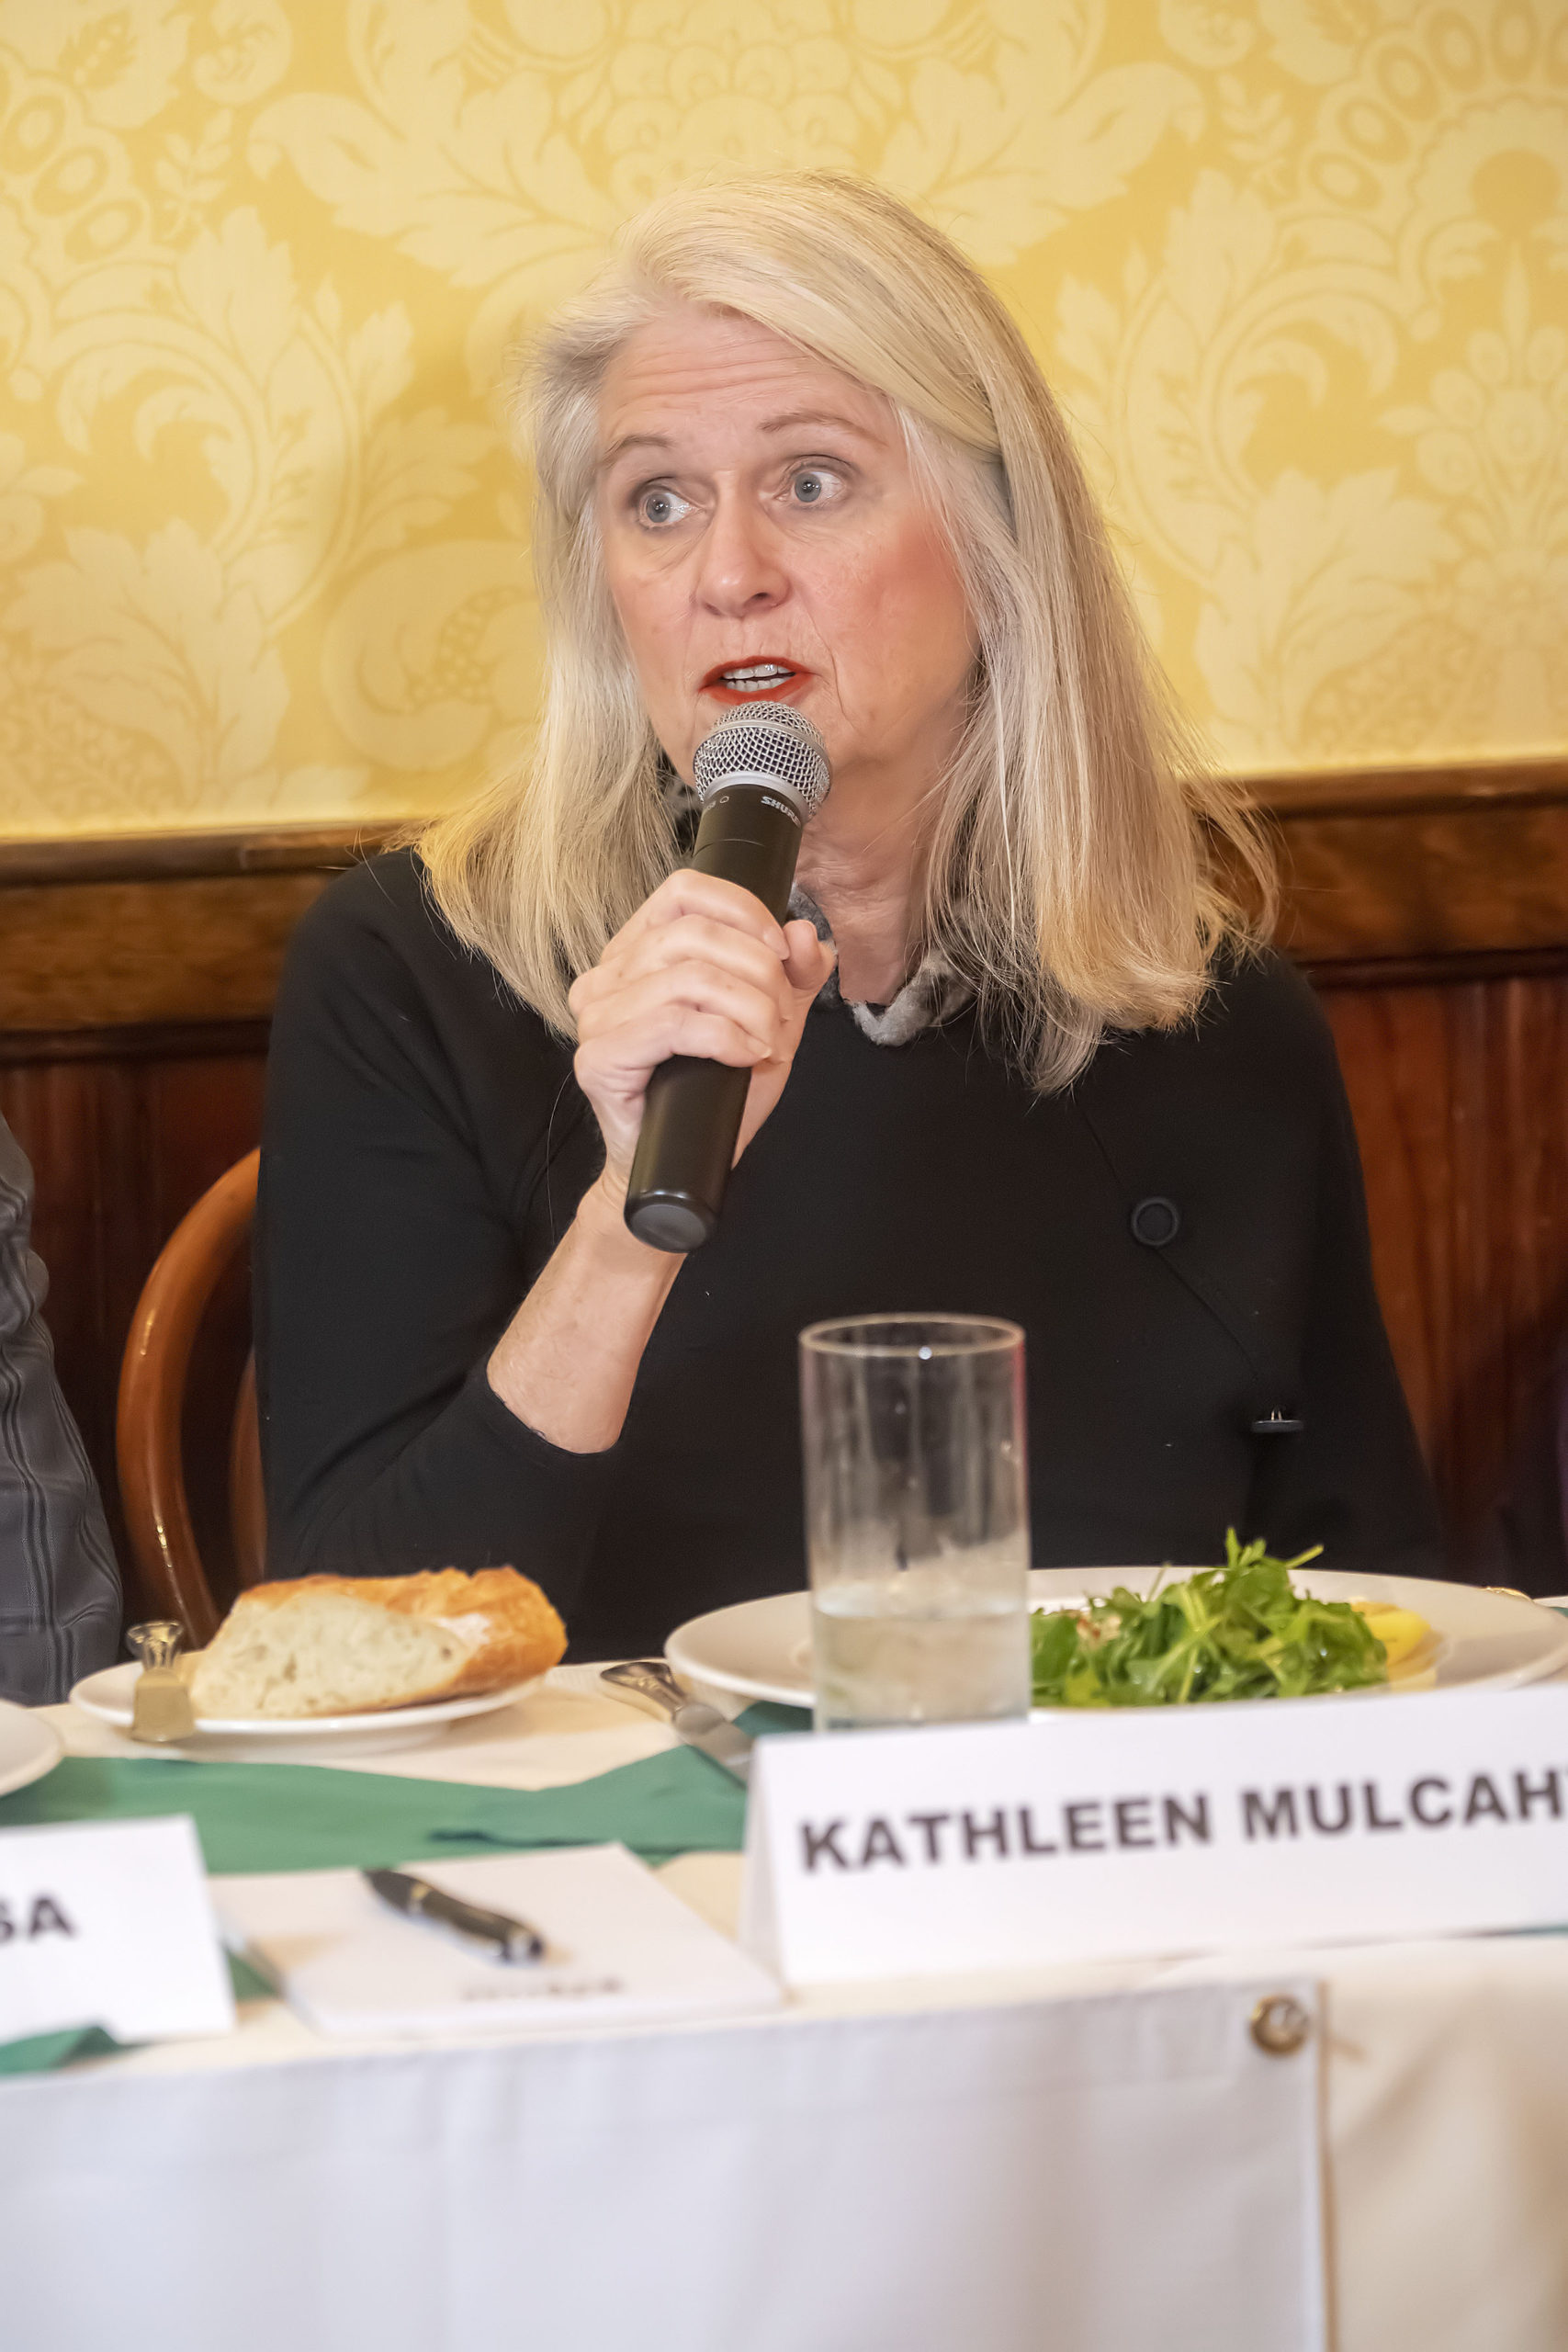 Sag Harbor Mayor and panelist Kathleen Mulcahy at the Express Sessions: Modernizing History event on Friday. MICHAEL HELLER